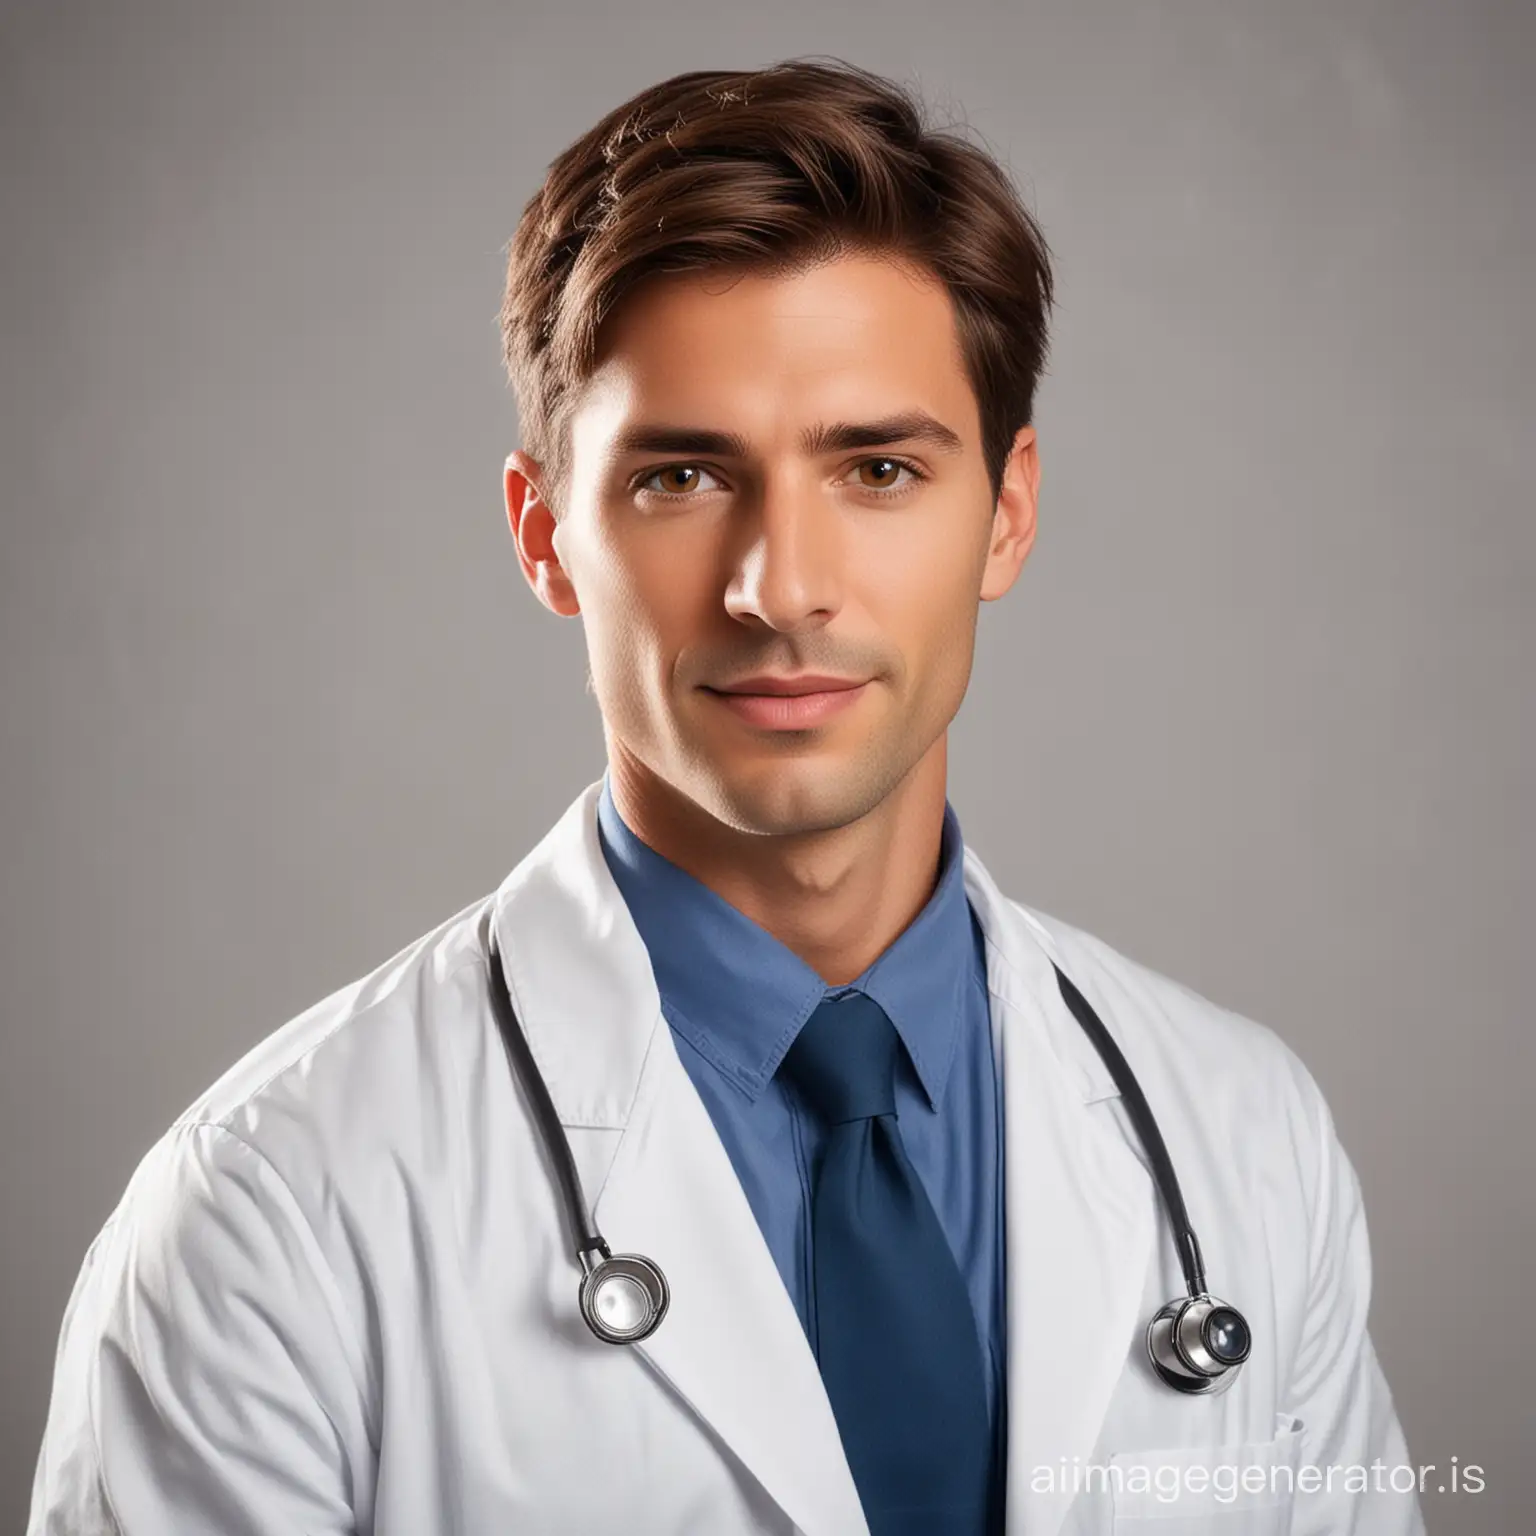 Confident-BrownHaired-Male-Doctor-in-Professional-Attire